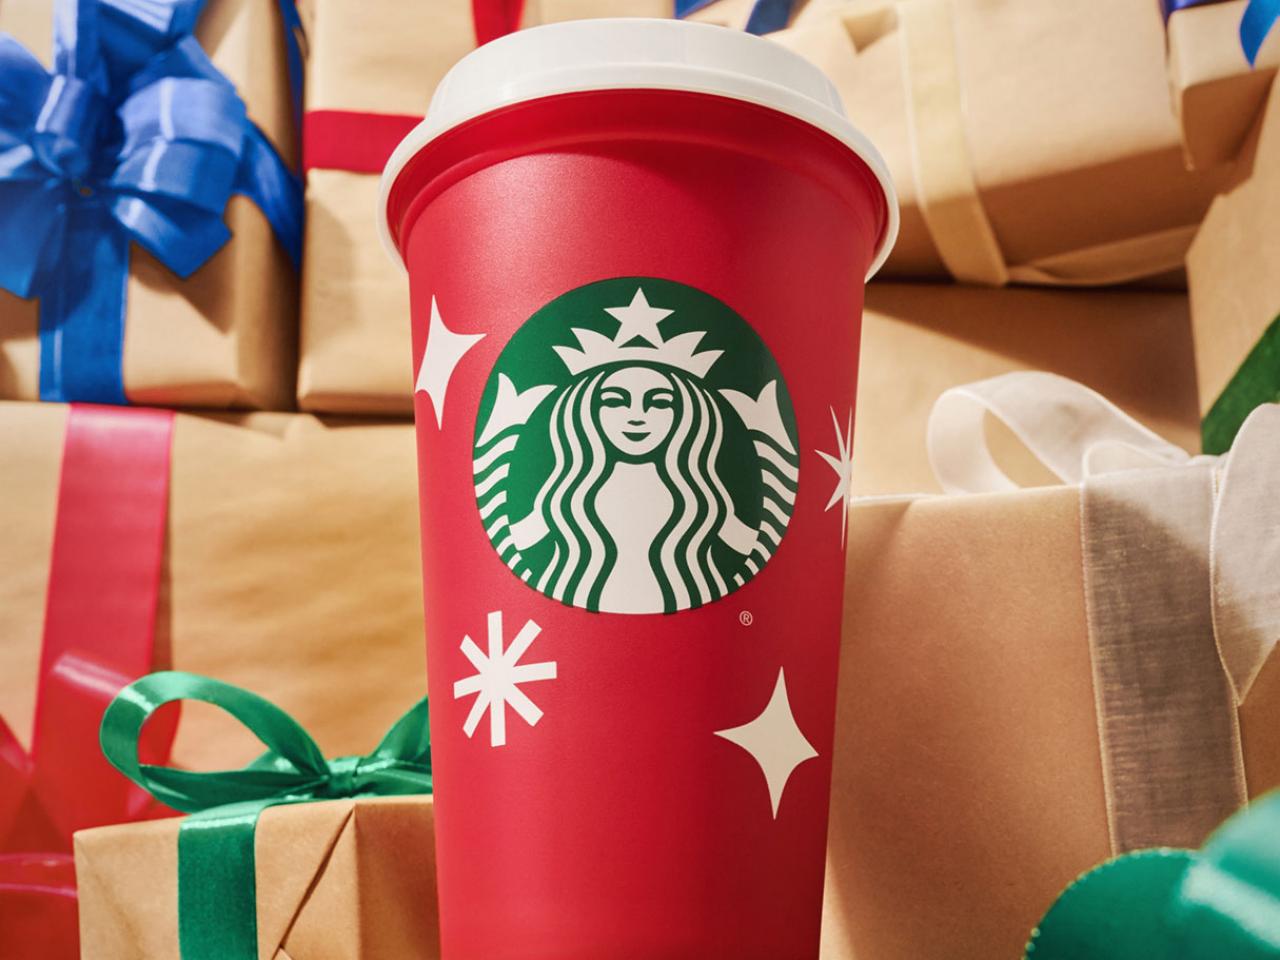 Get Your Free Reusable Red Cup at Starbucks on November 17, 2022 FN